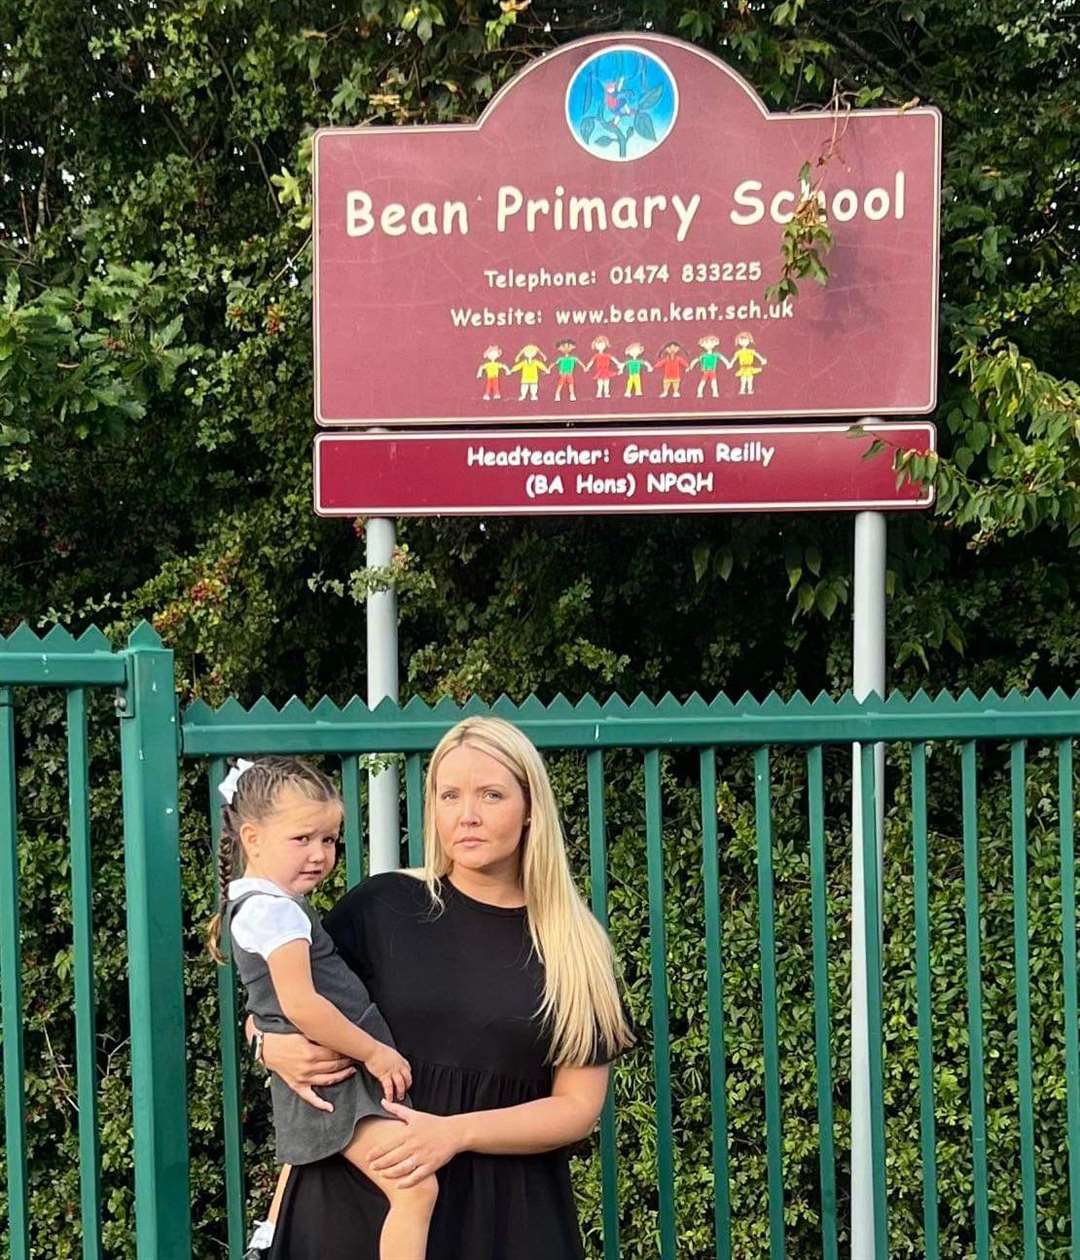 Fay Armitage is unhappy her lactose-intolerant daughter Bonnie is being told to have school dinners at Bean Primary School